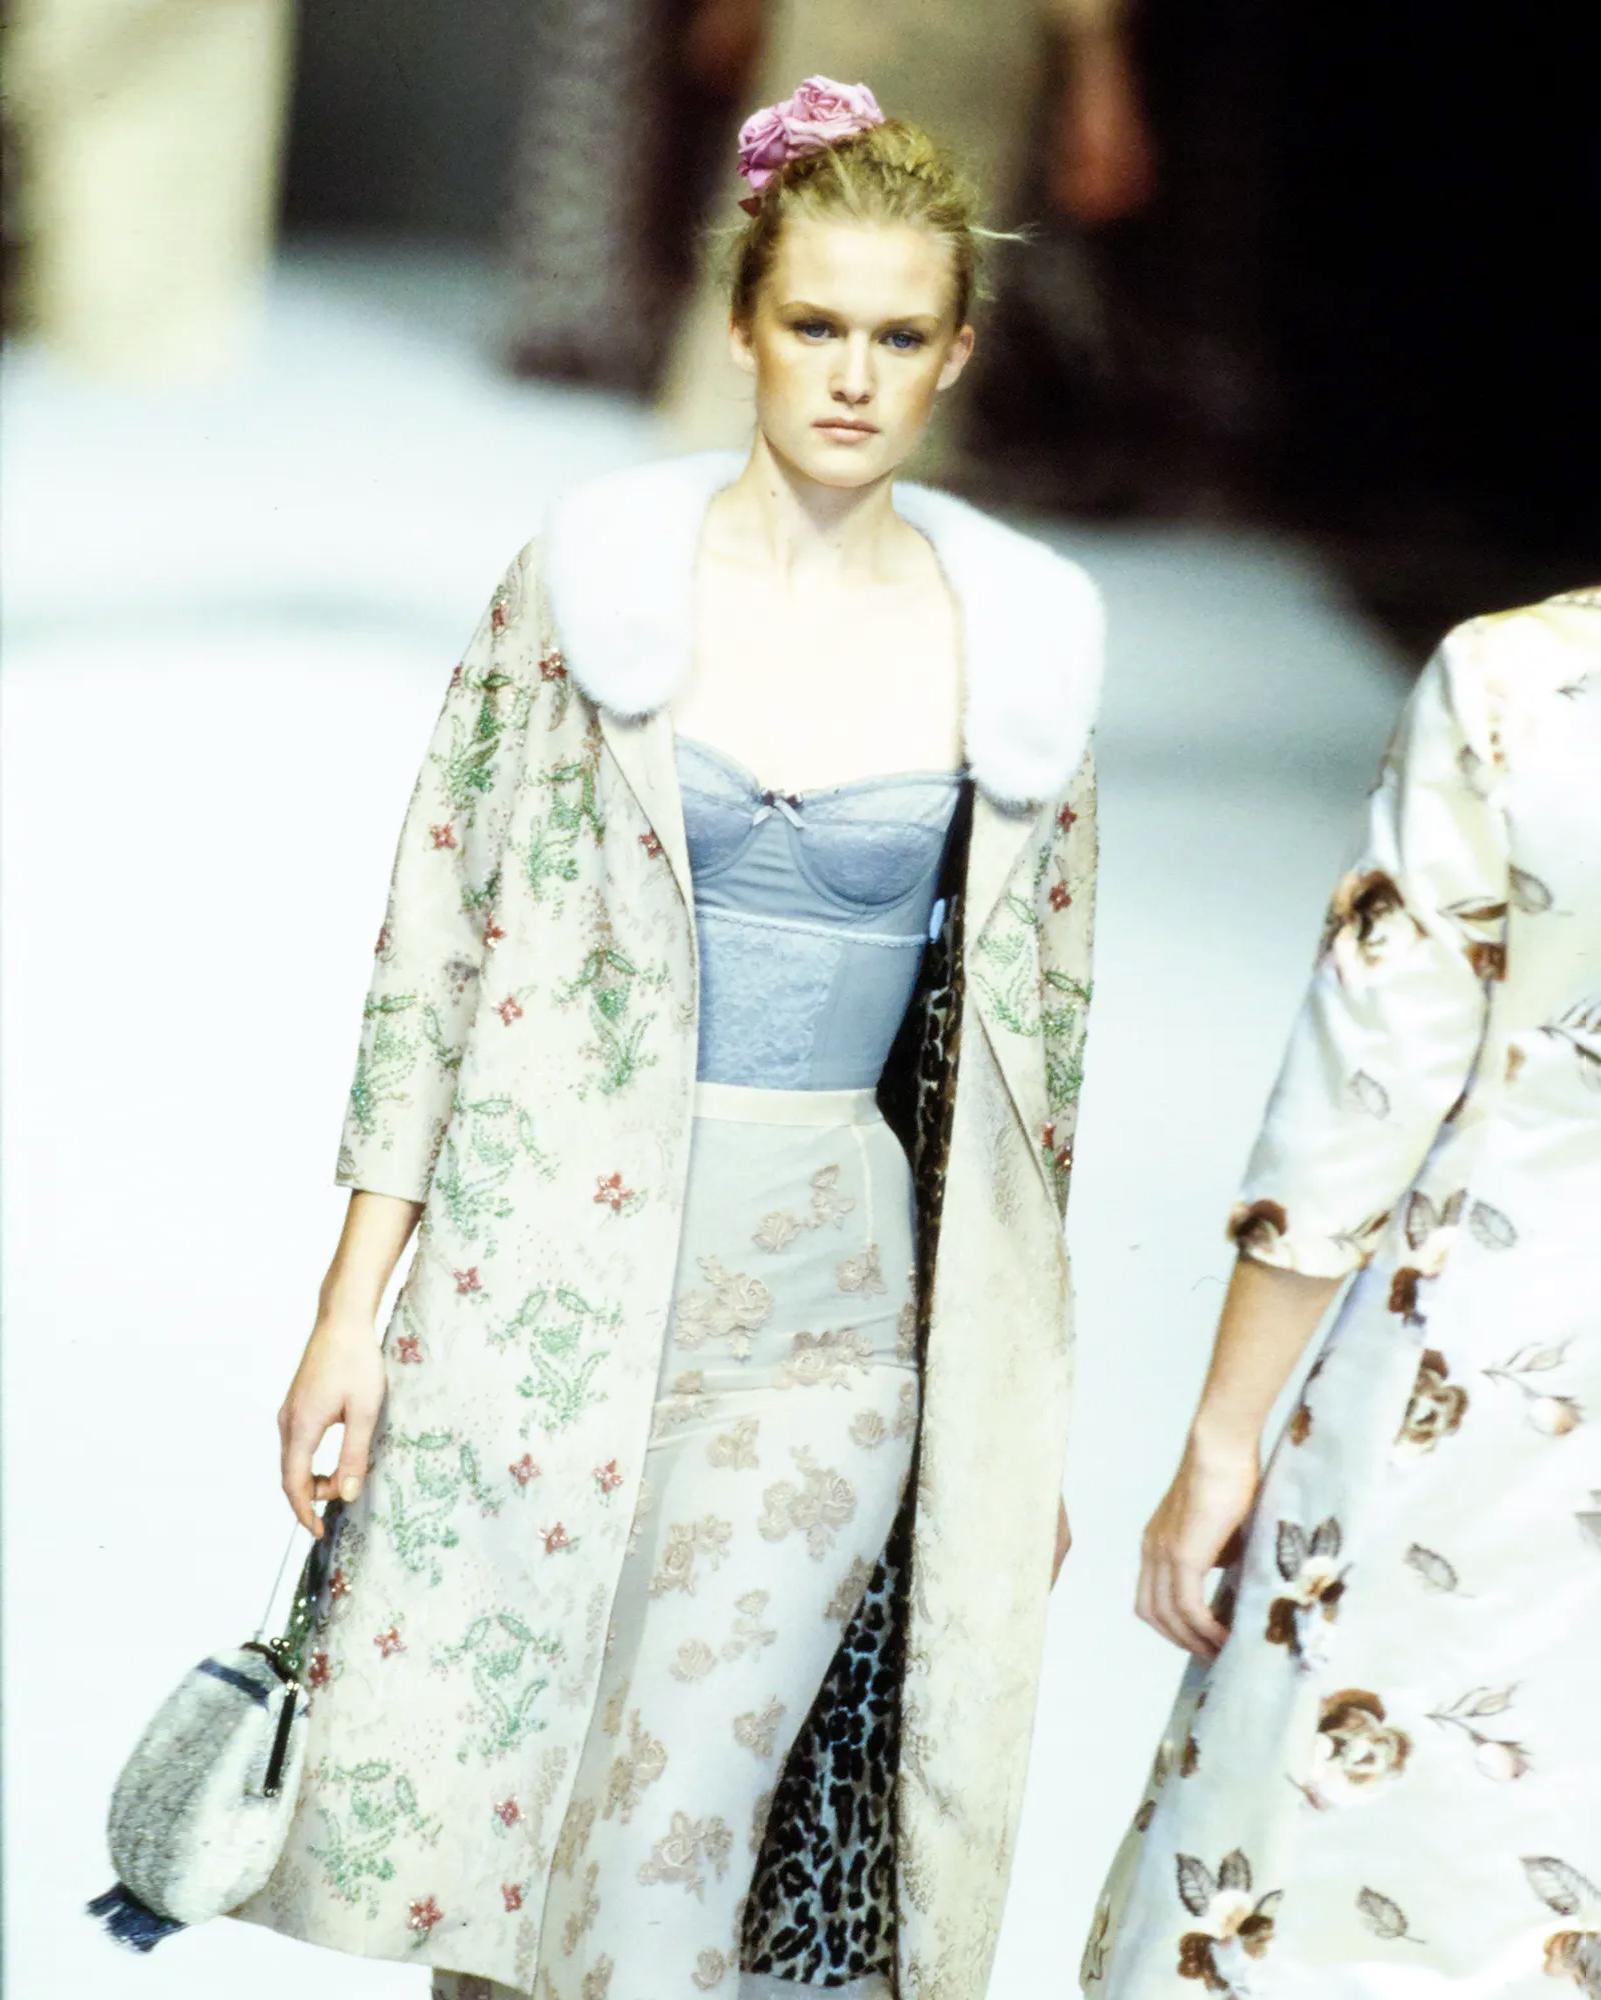 Dolce & Gabbana Hand-Embroidered White Raw Silk Evening Couture Coat, ss 1997 For Sale 1